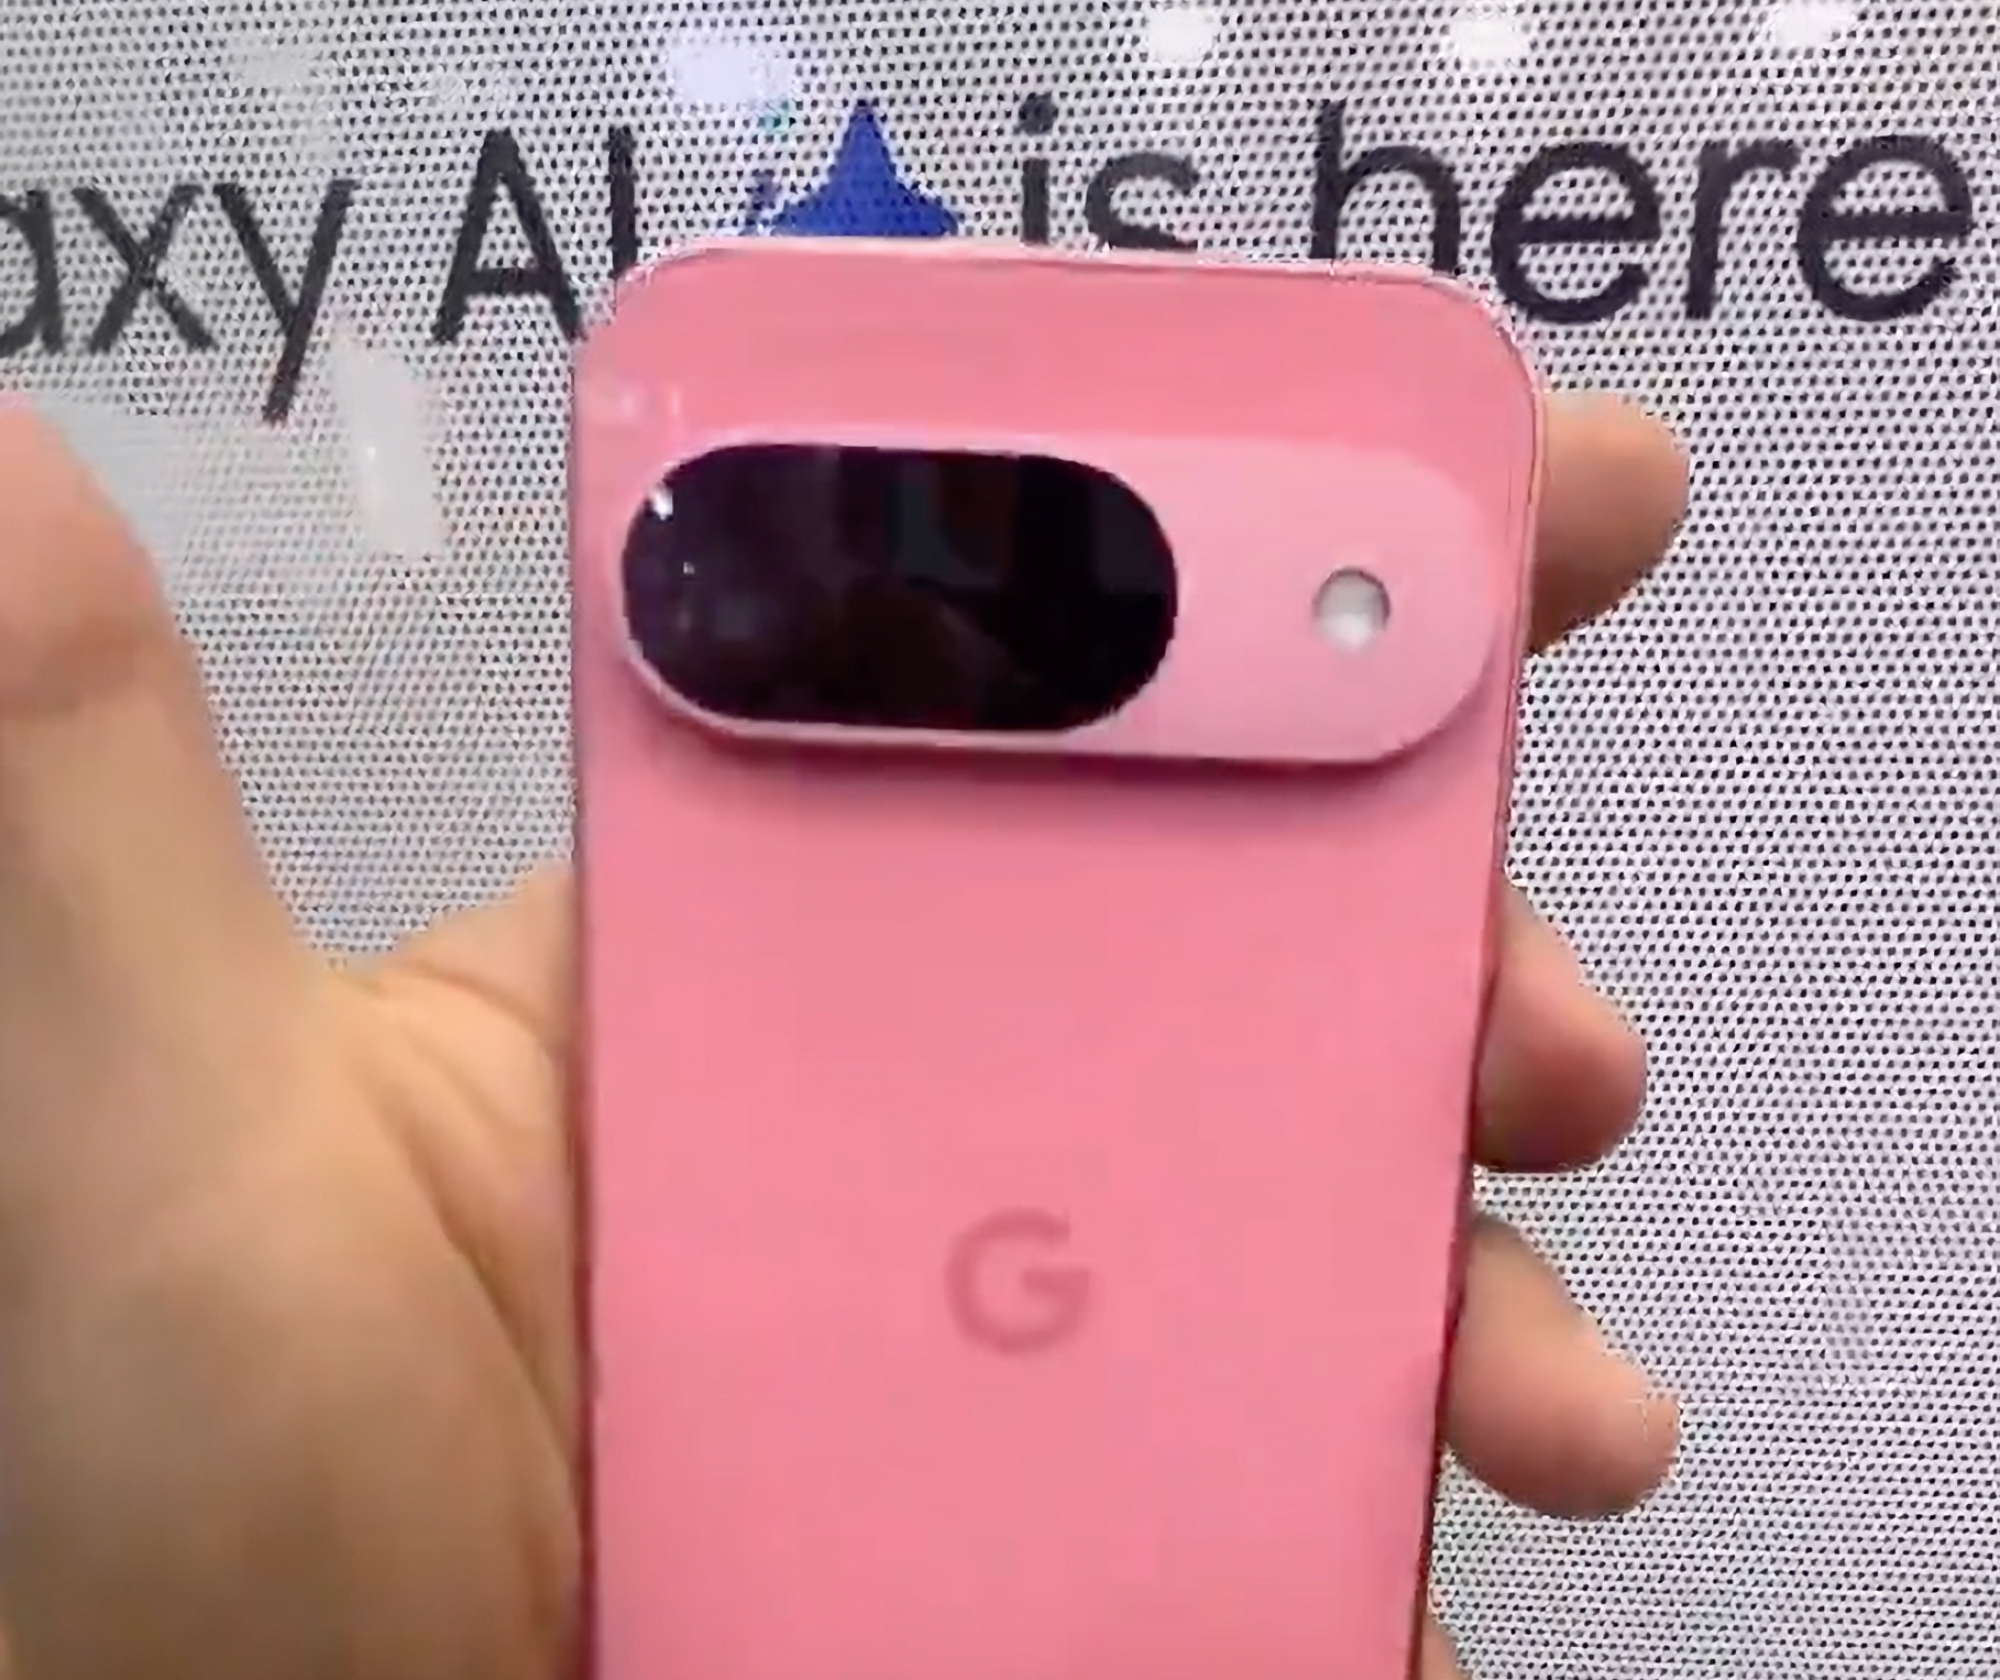 Google Pixel 9 appeared in a video in pink colour